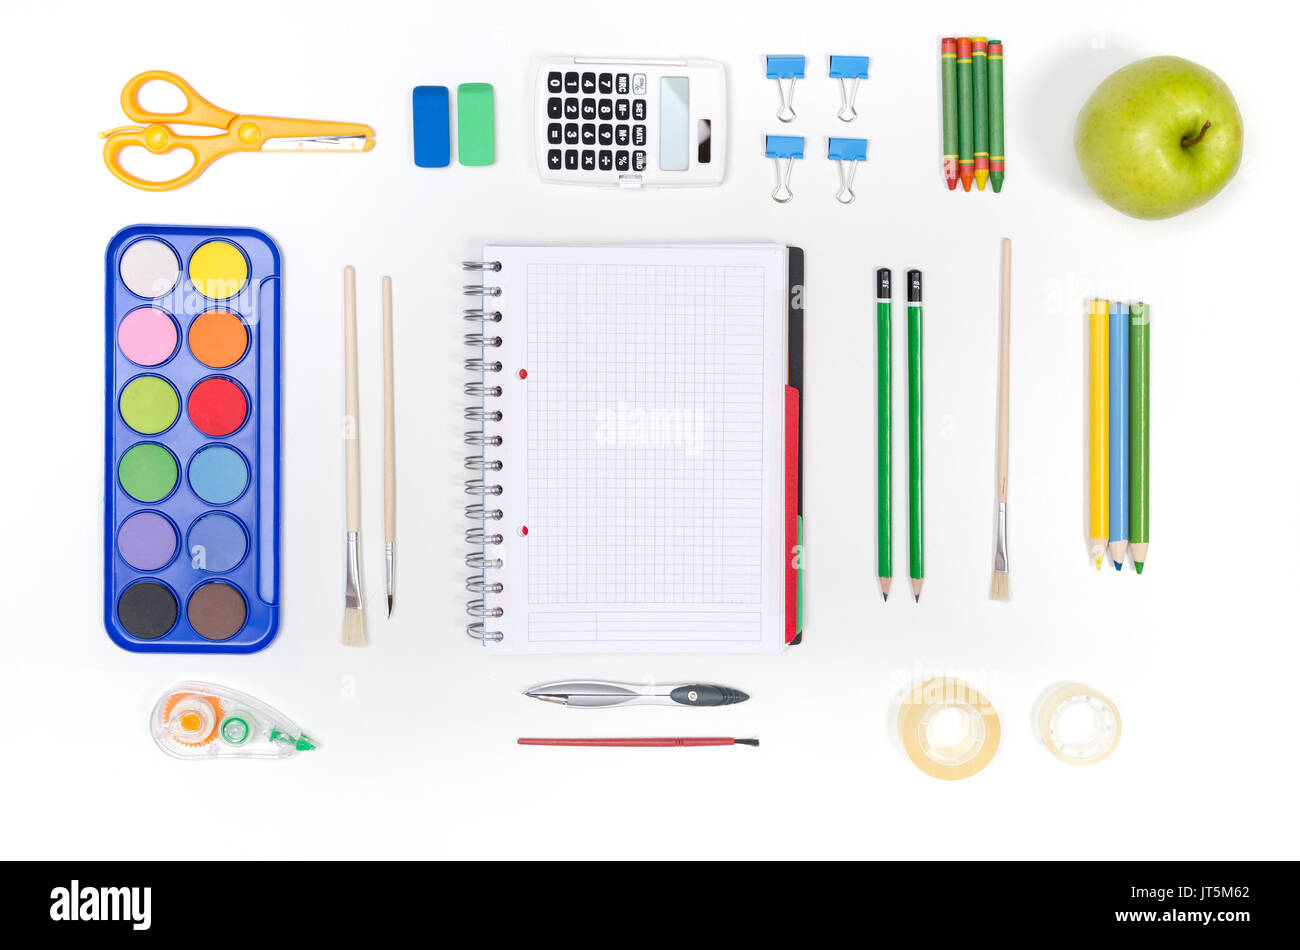 School supplies isolated on white background. Back to school concept Stock Photo